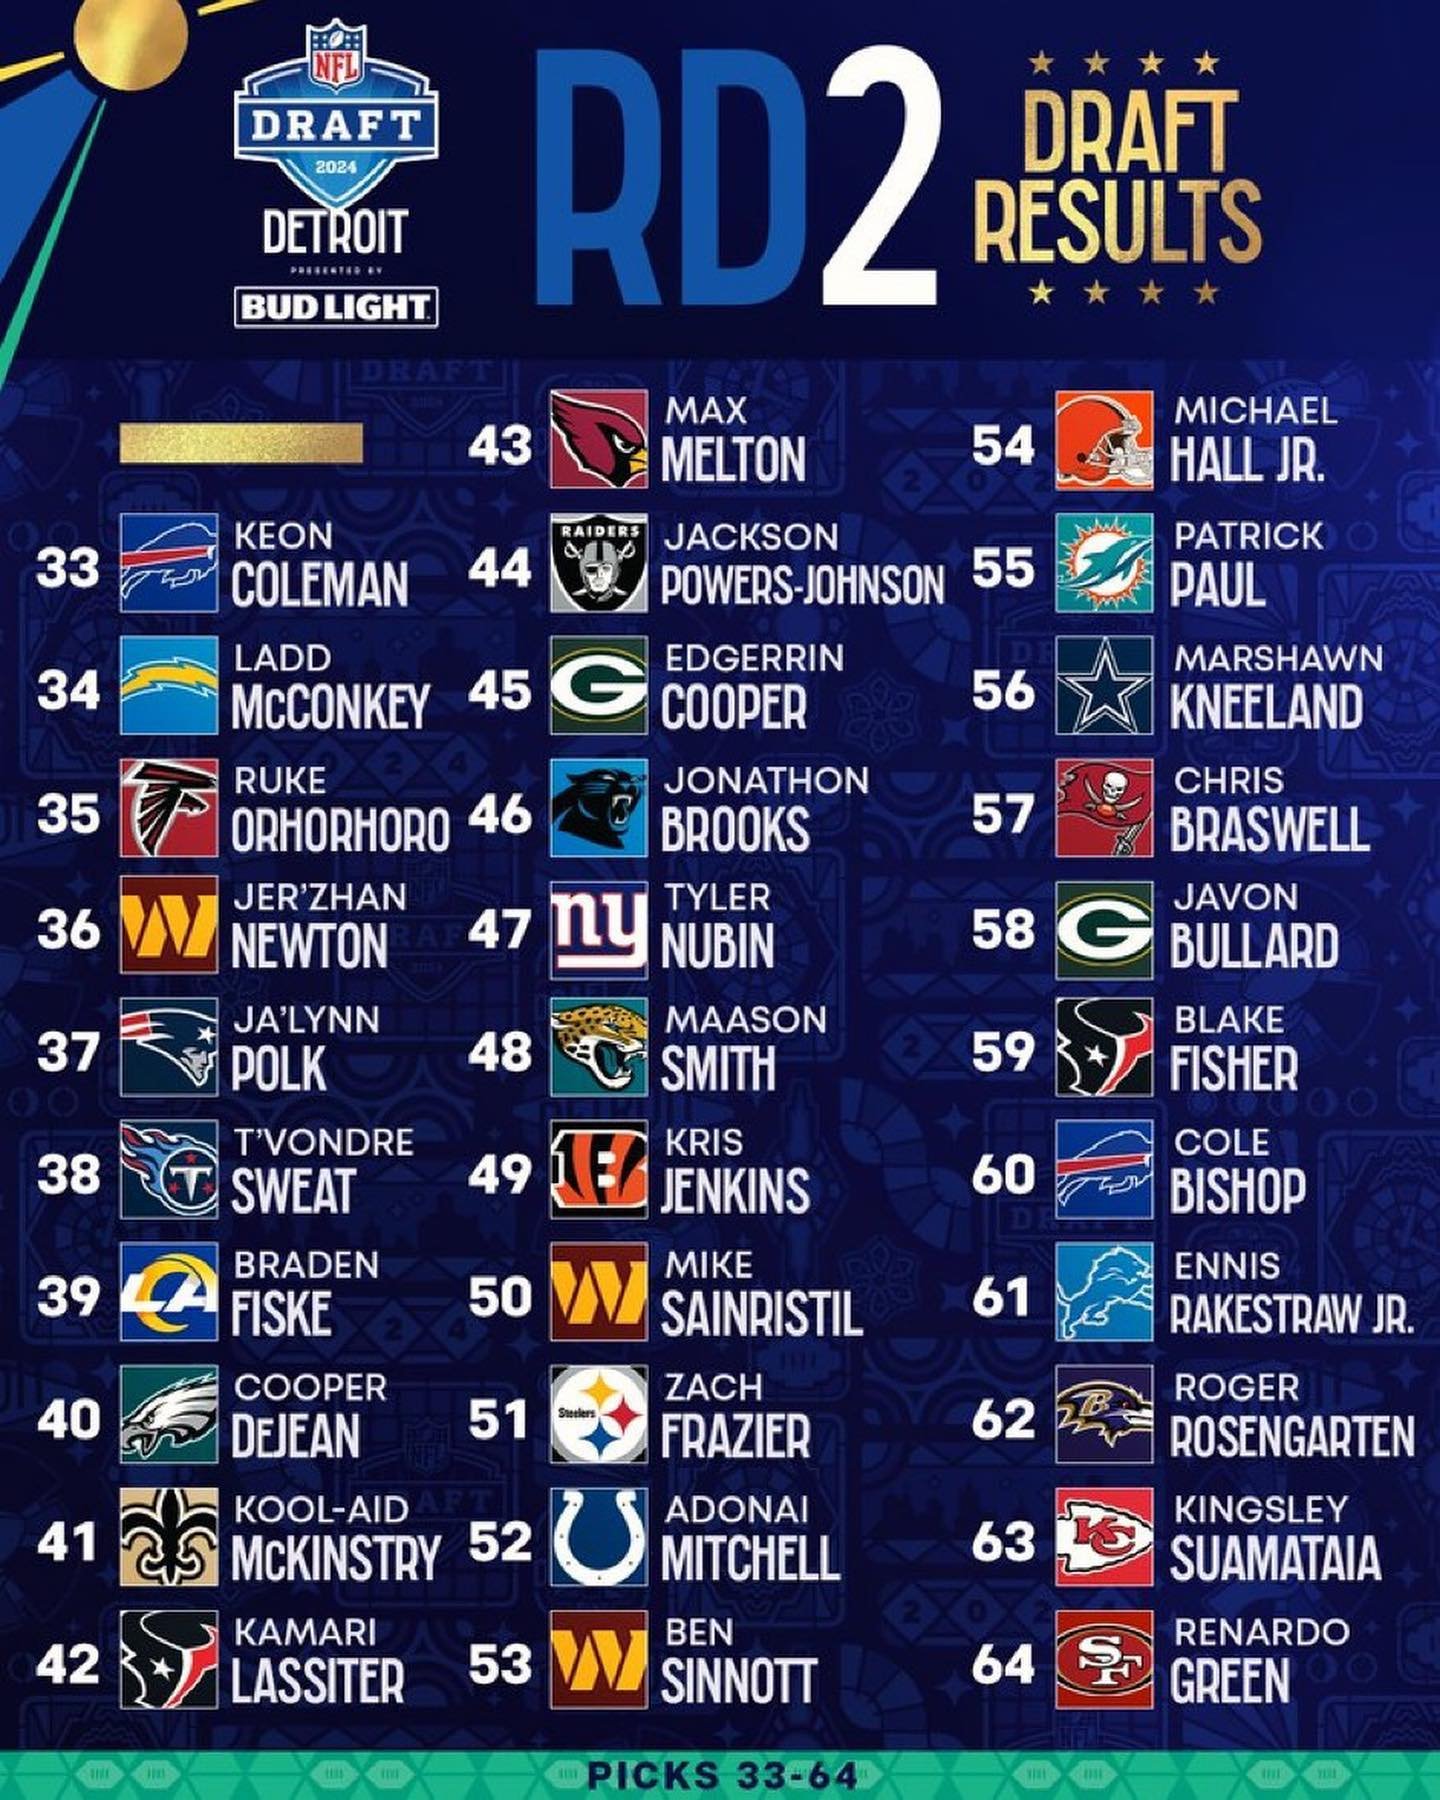 Last night round 2/3 from the nfl draft. Are you happy with your teams picks so far.